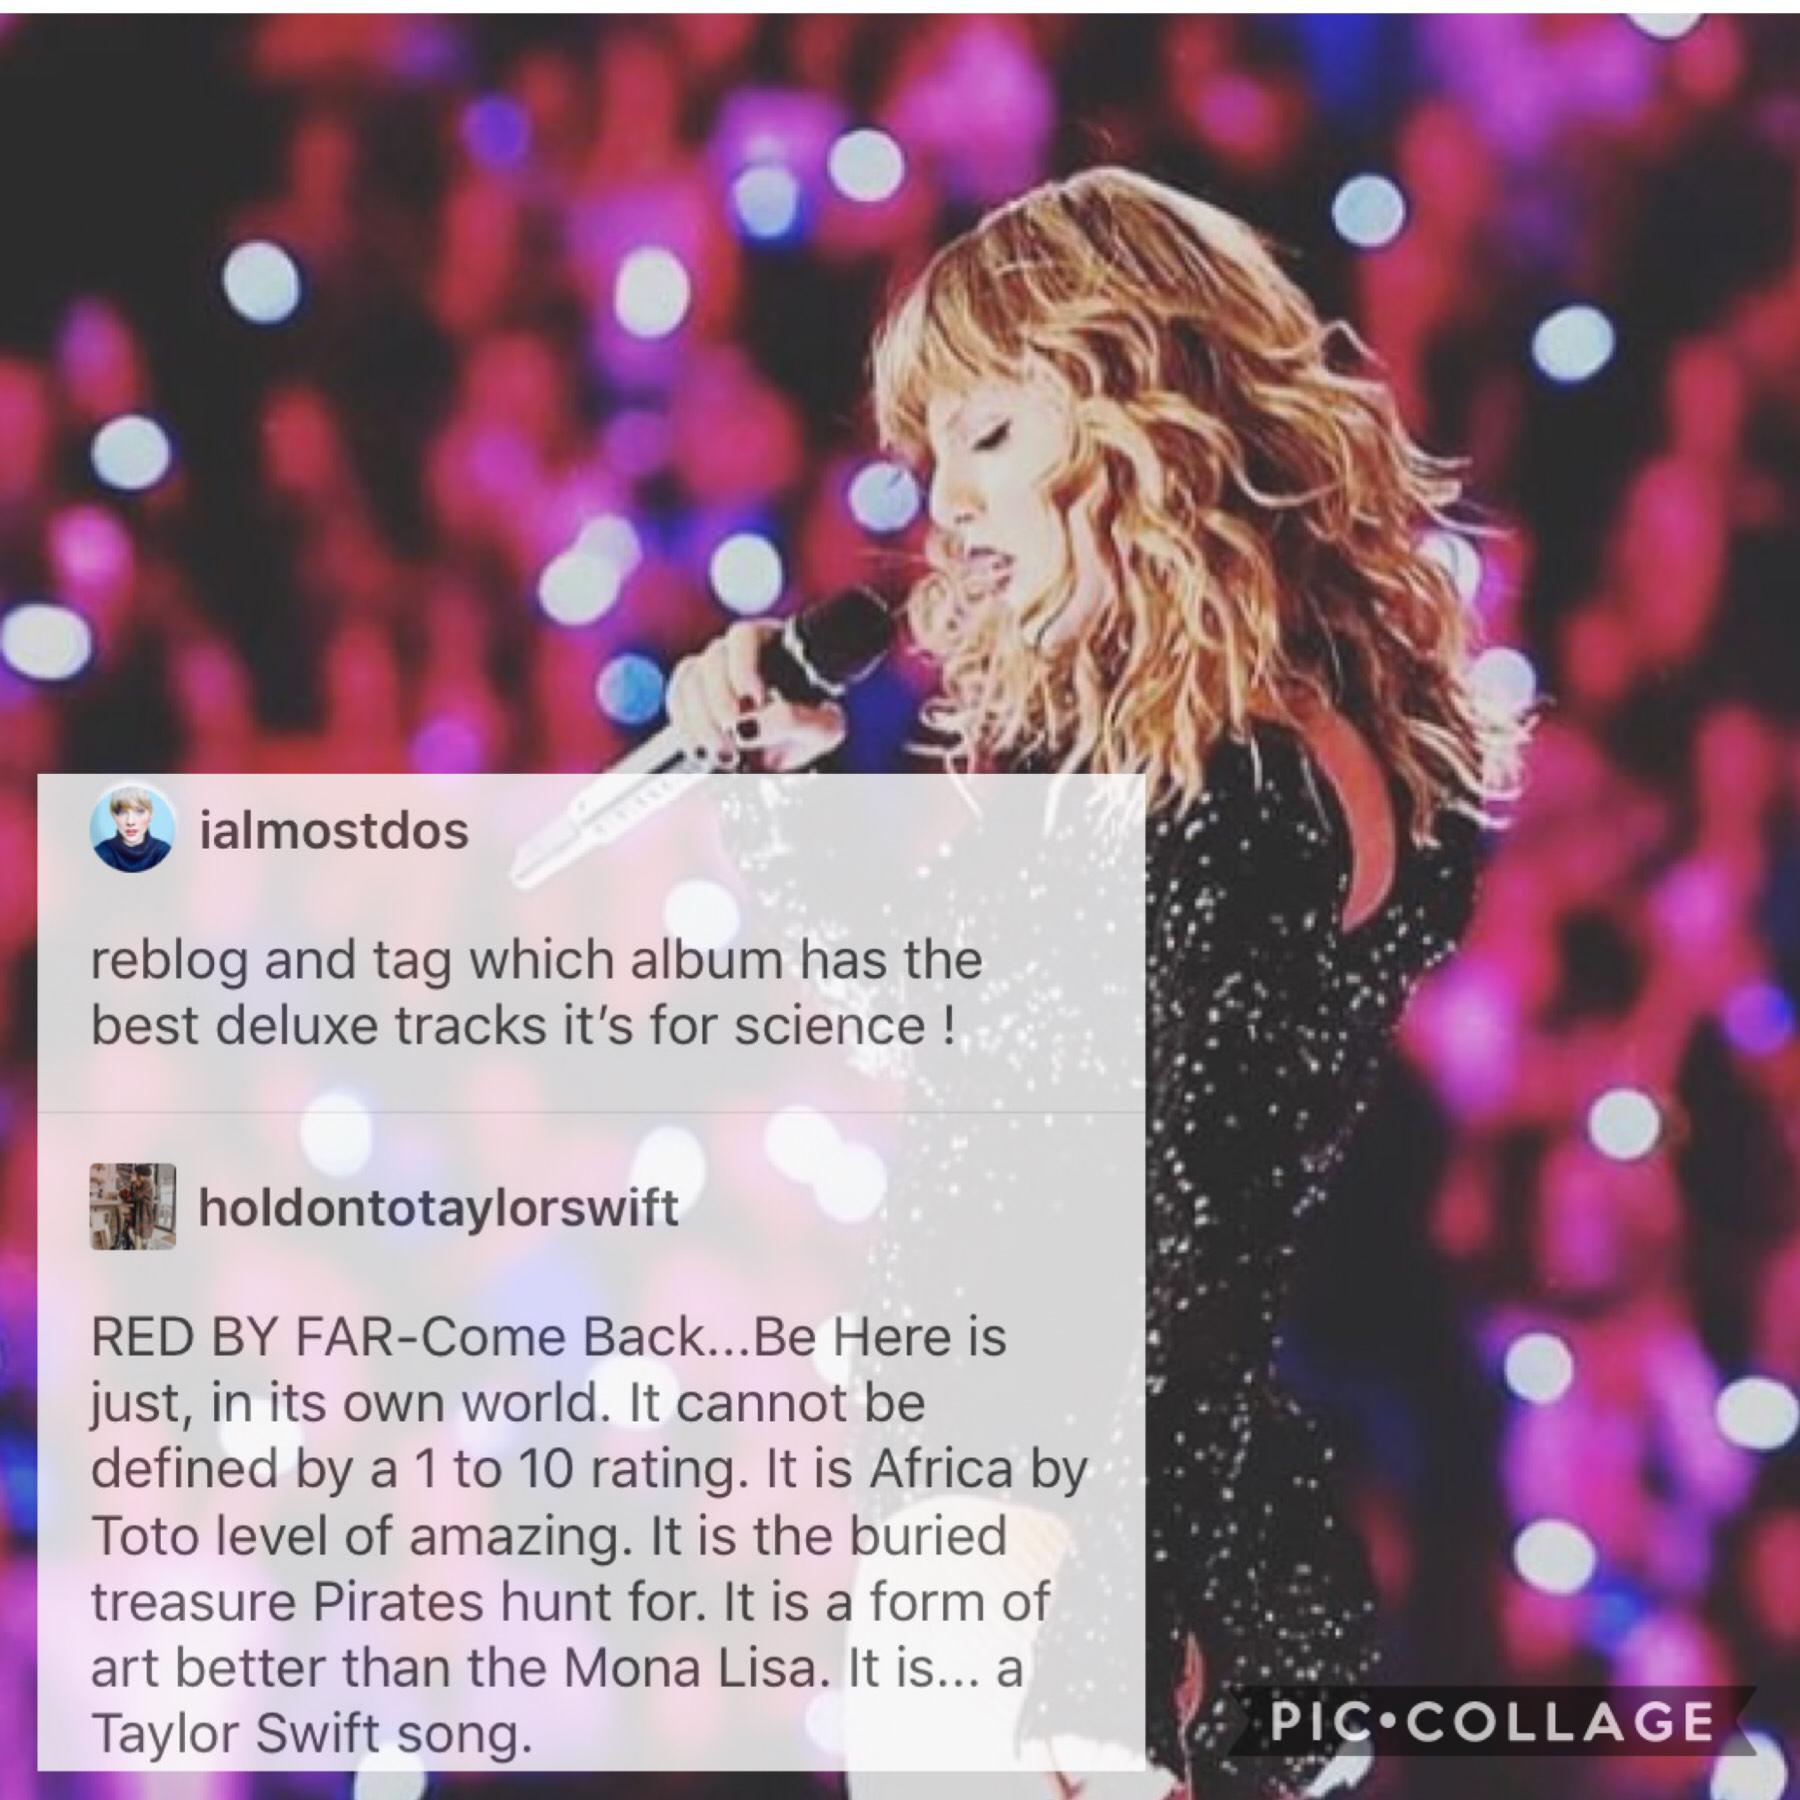 ❤️TAP❤️
The comment is very well put.
Q: Which album do you think has the best bonus tracks?
A: Either Red or Fearless